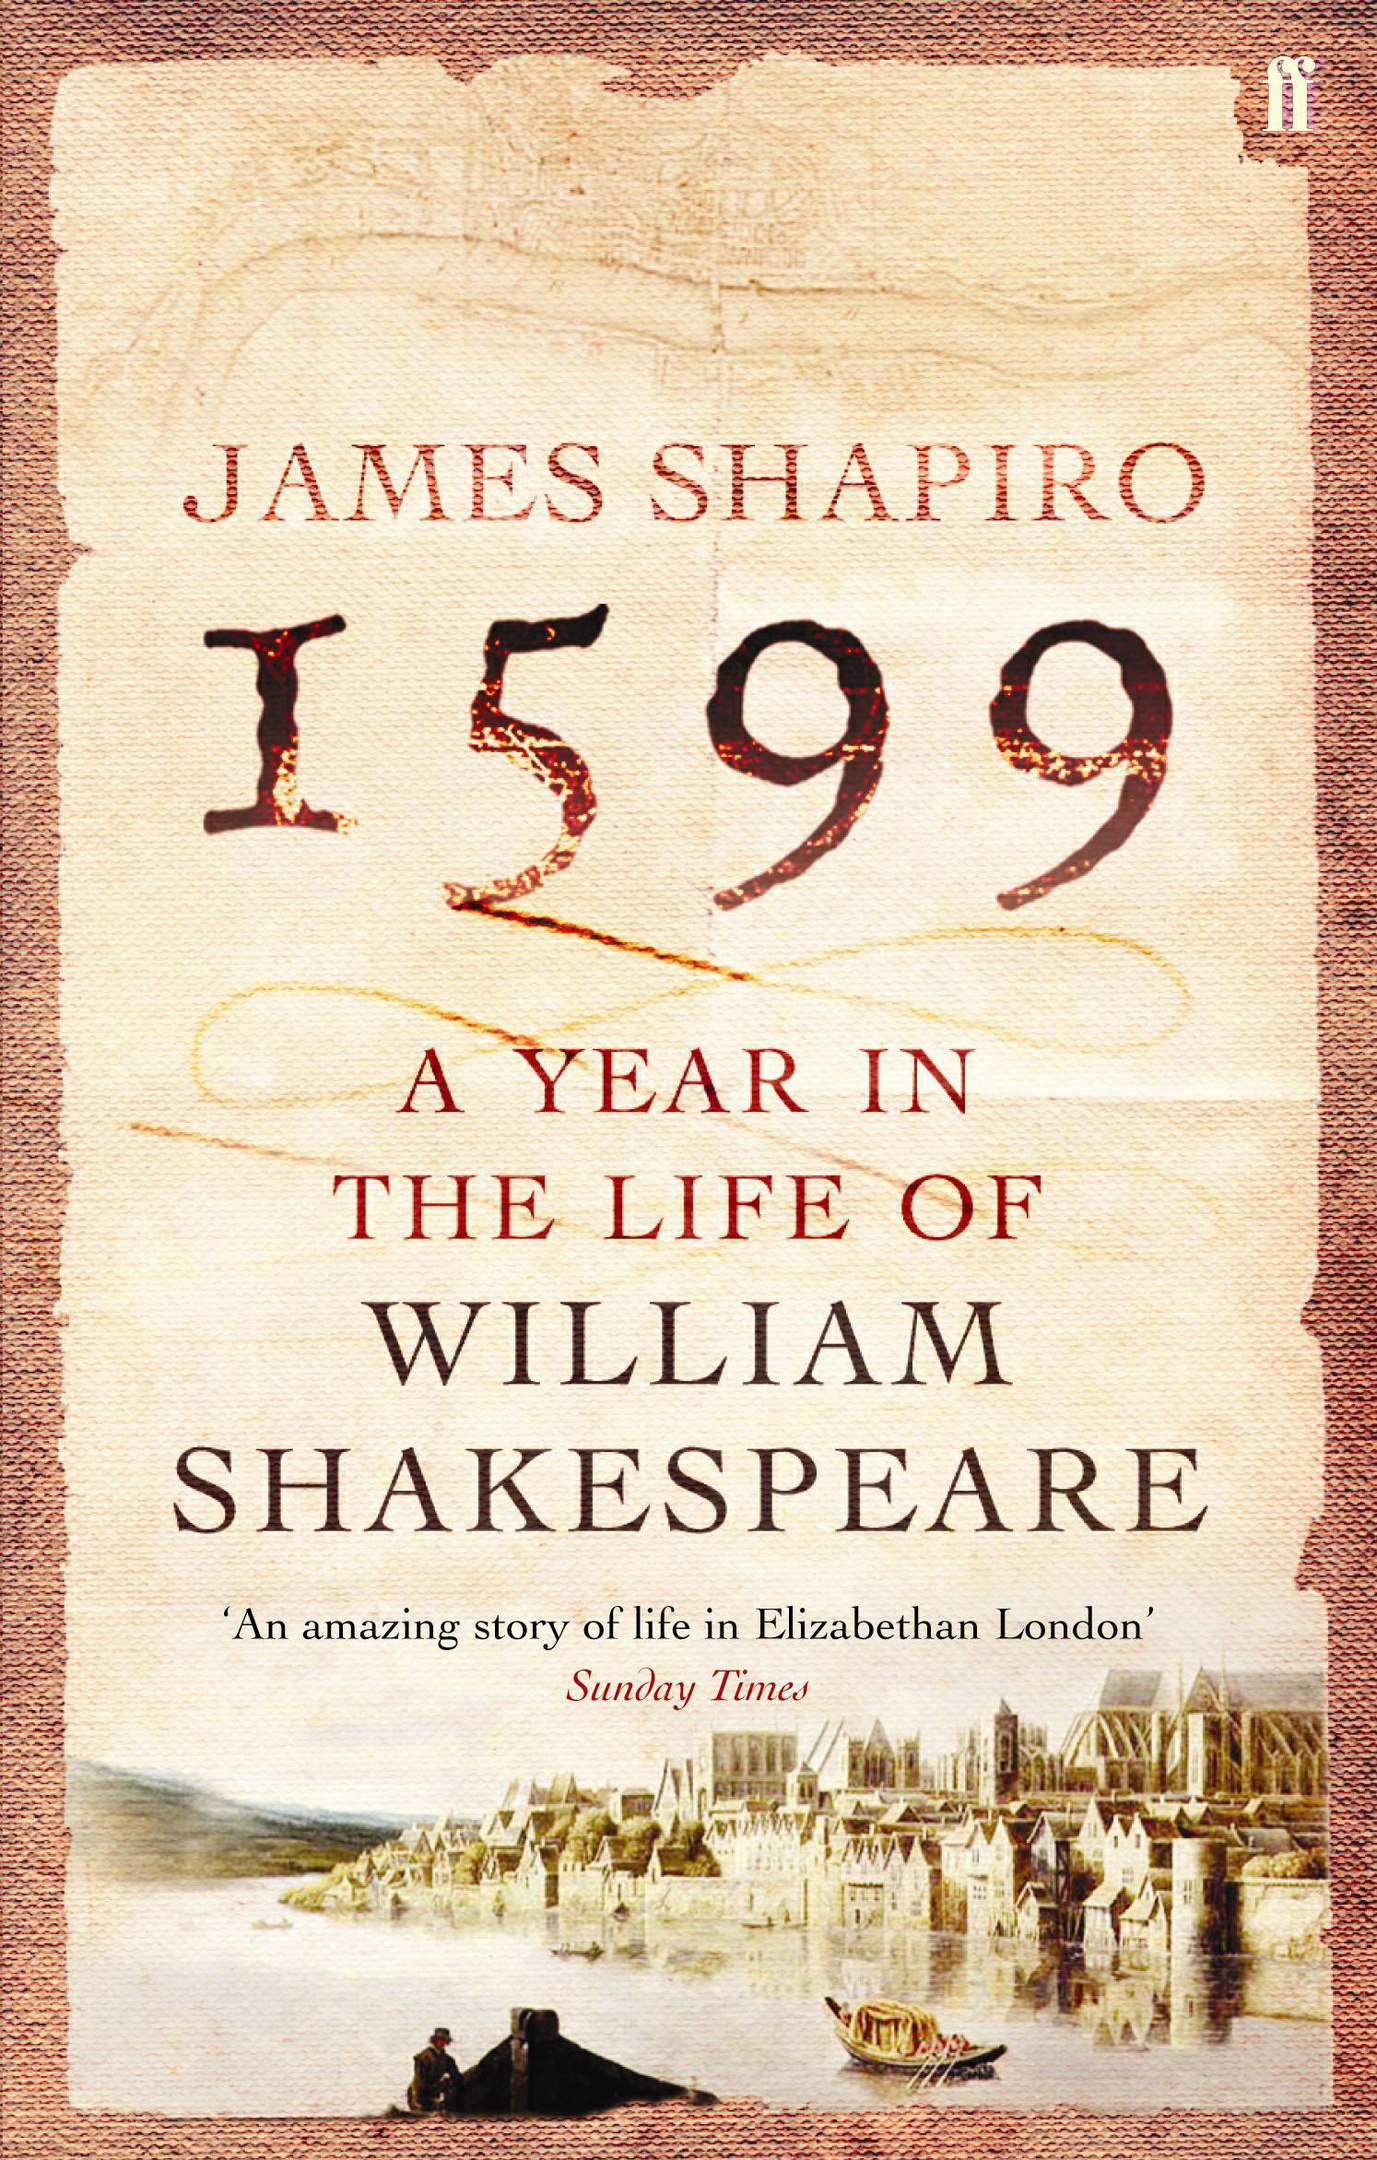 James Shapiro – A Year In The Life Of William Shakespeare